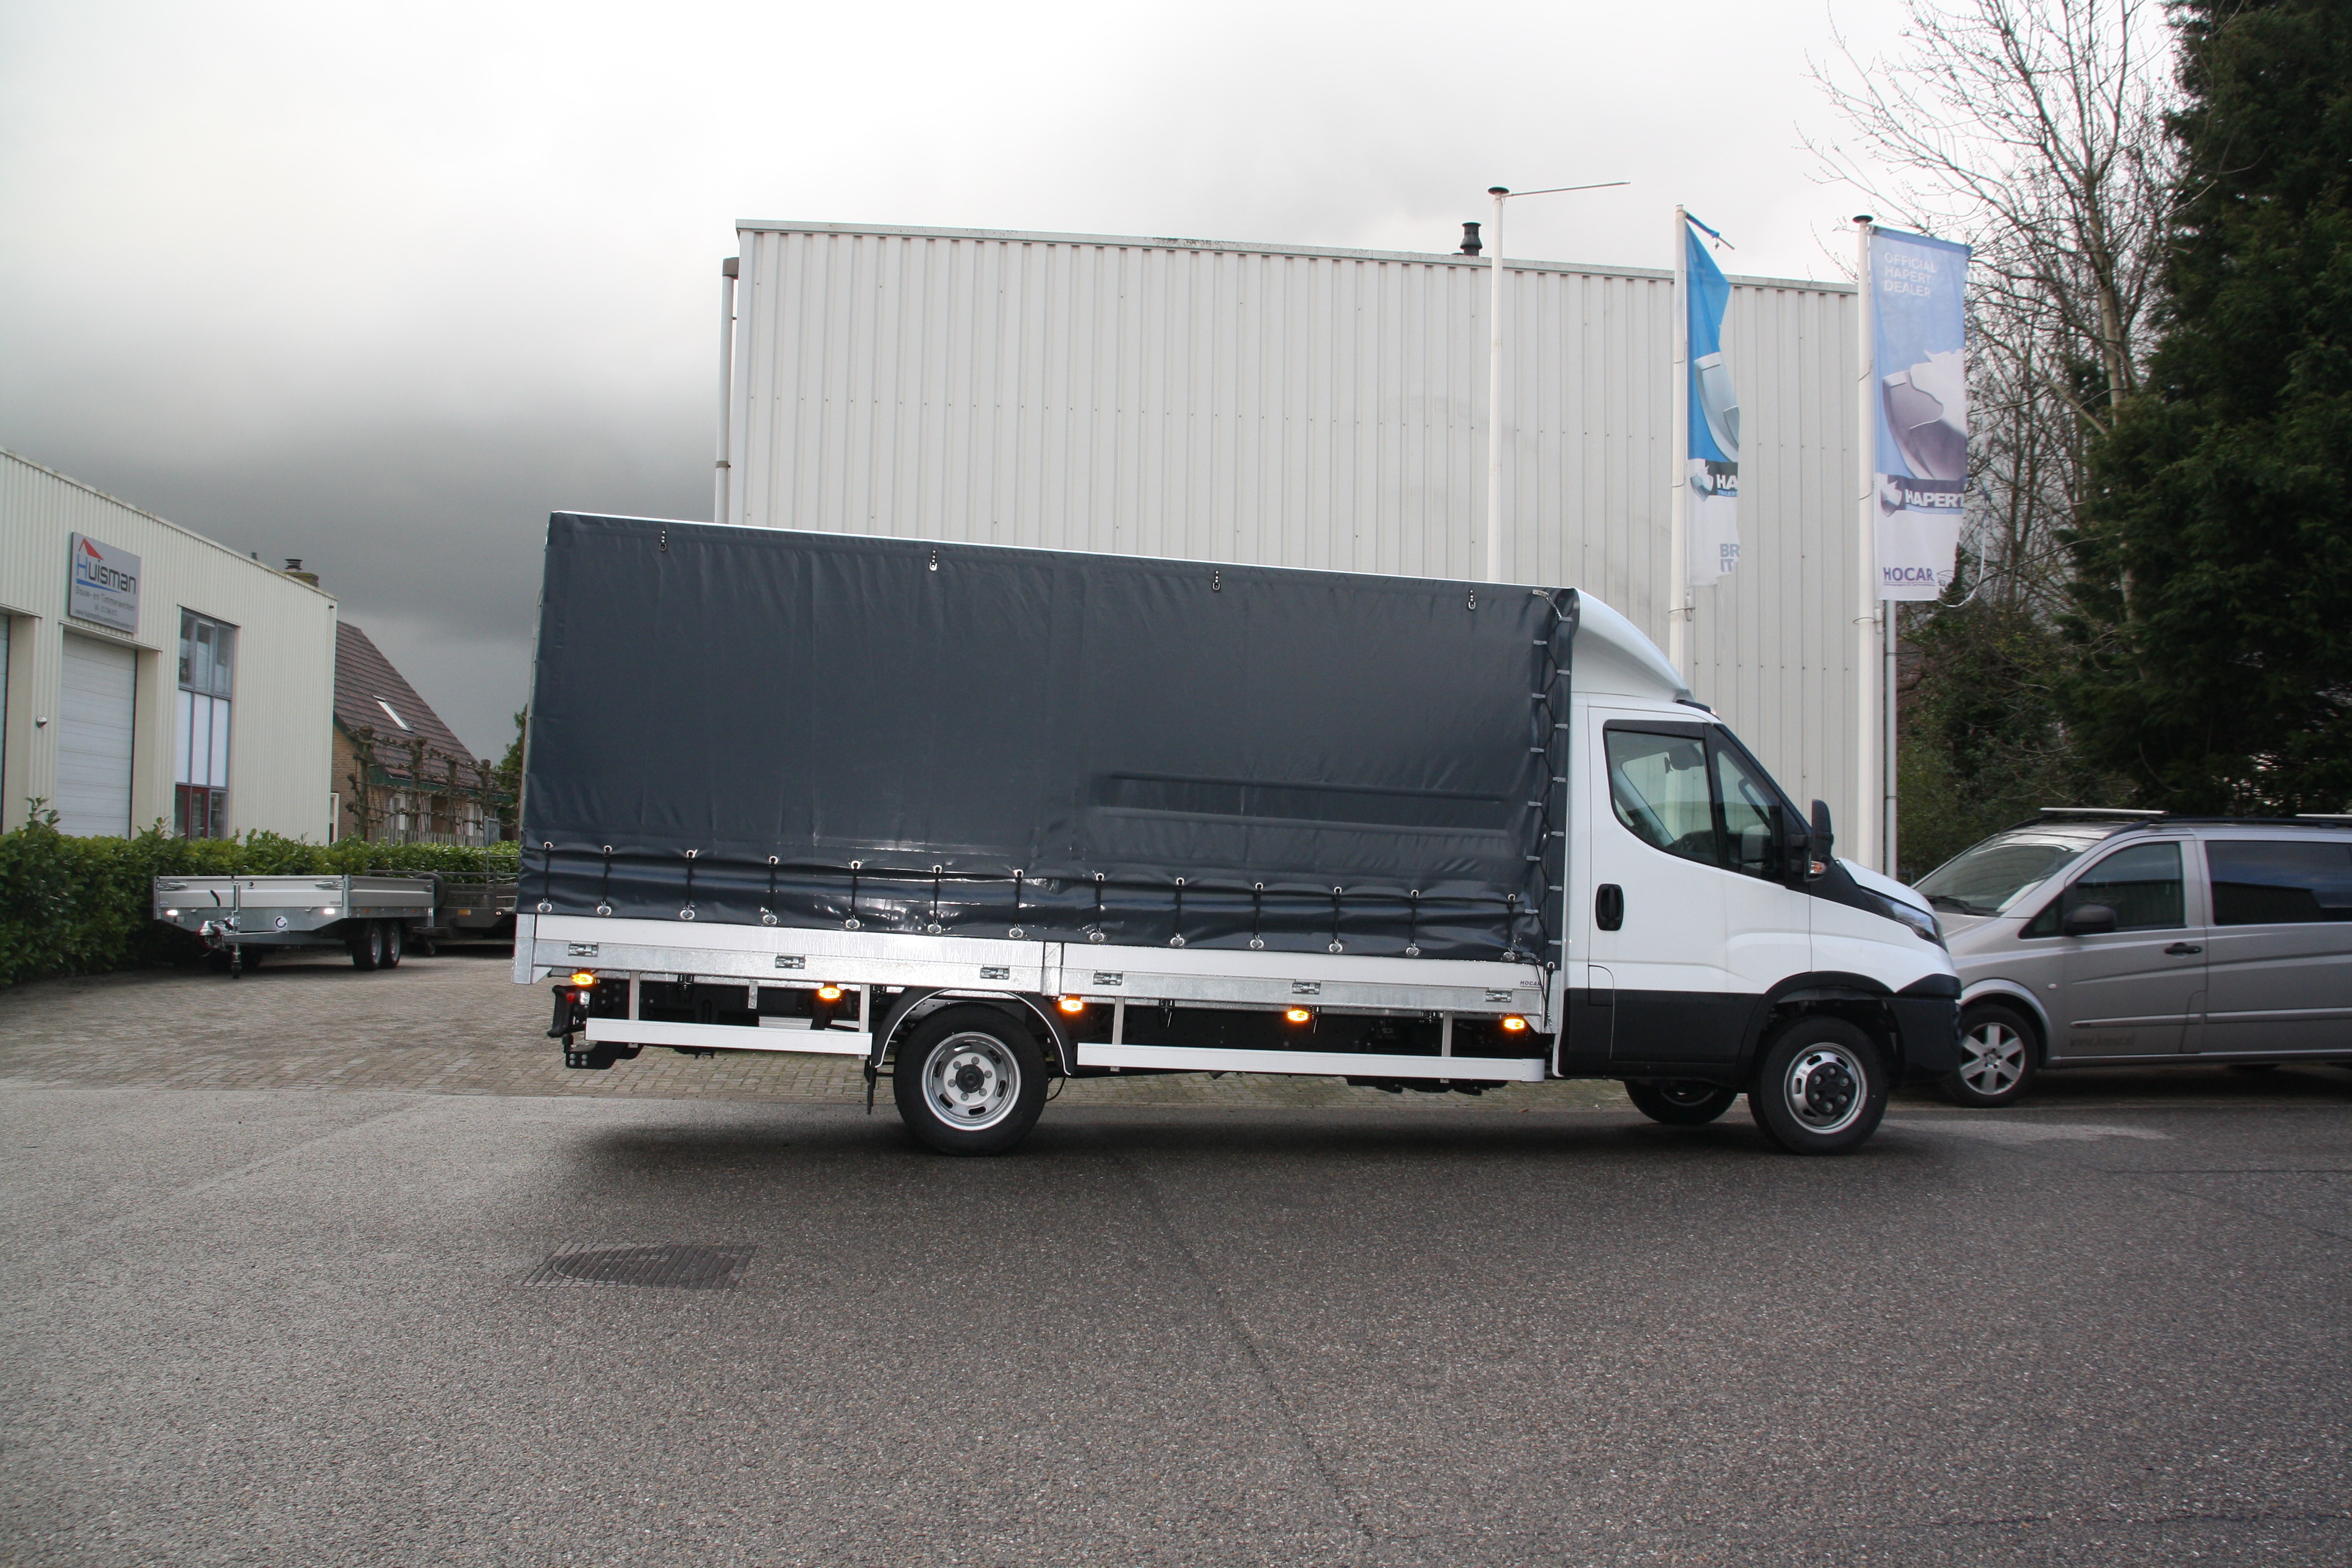 Bakopbouw Iveco chassis incl. huif